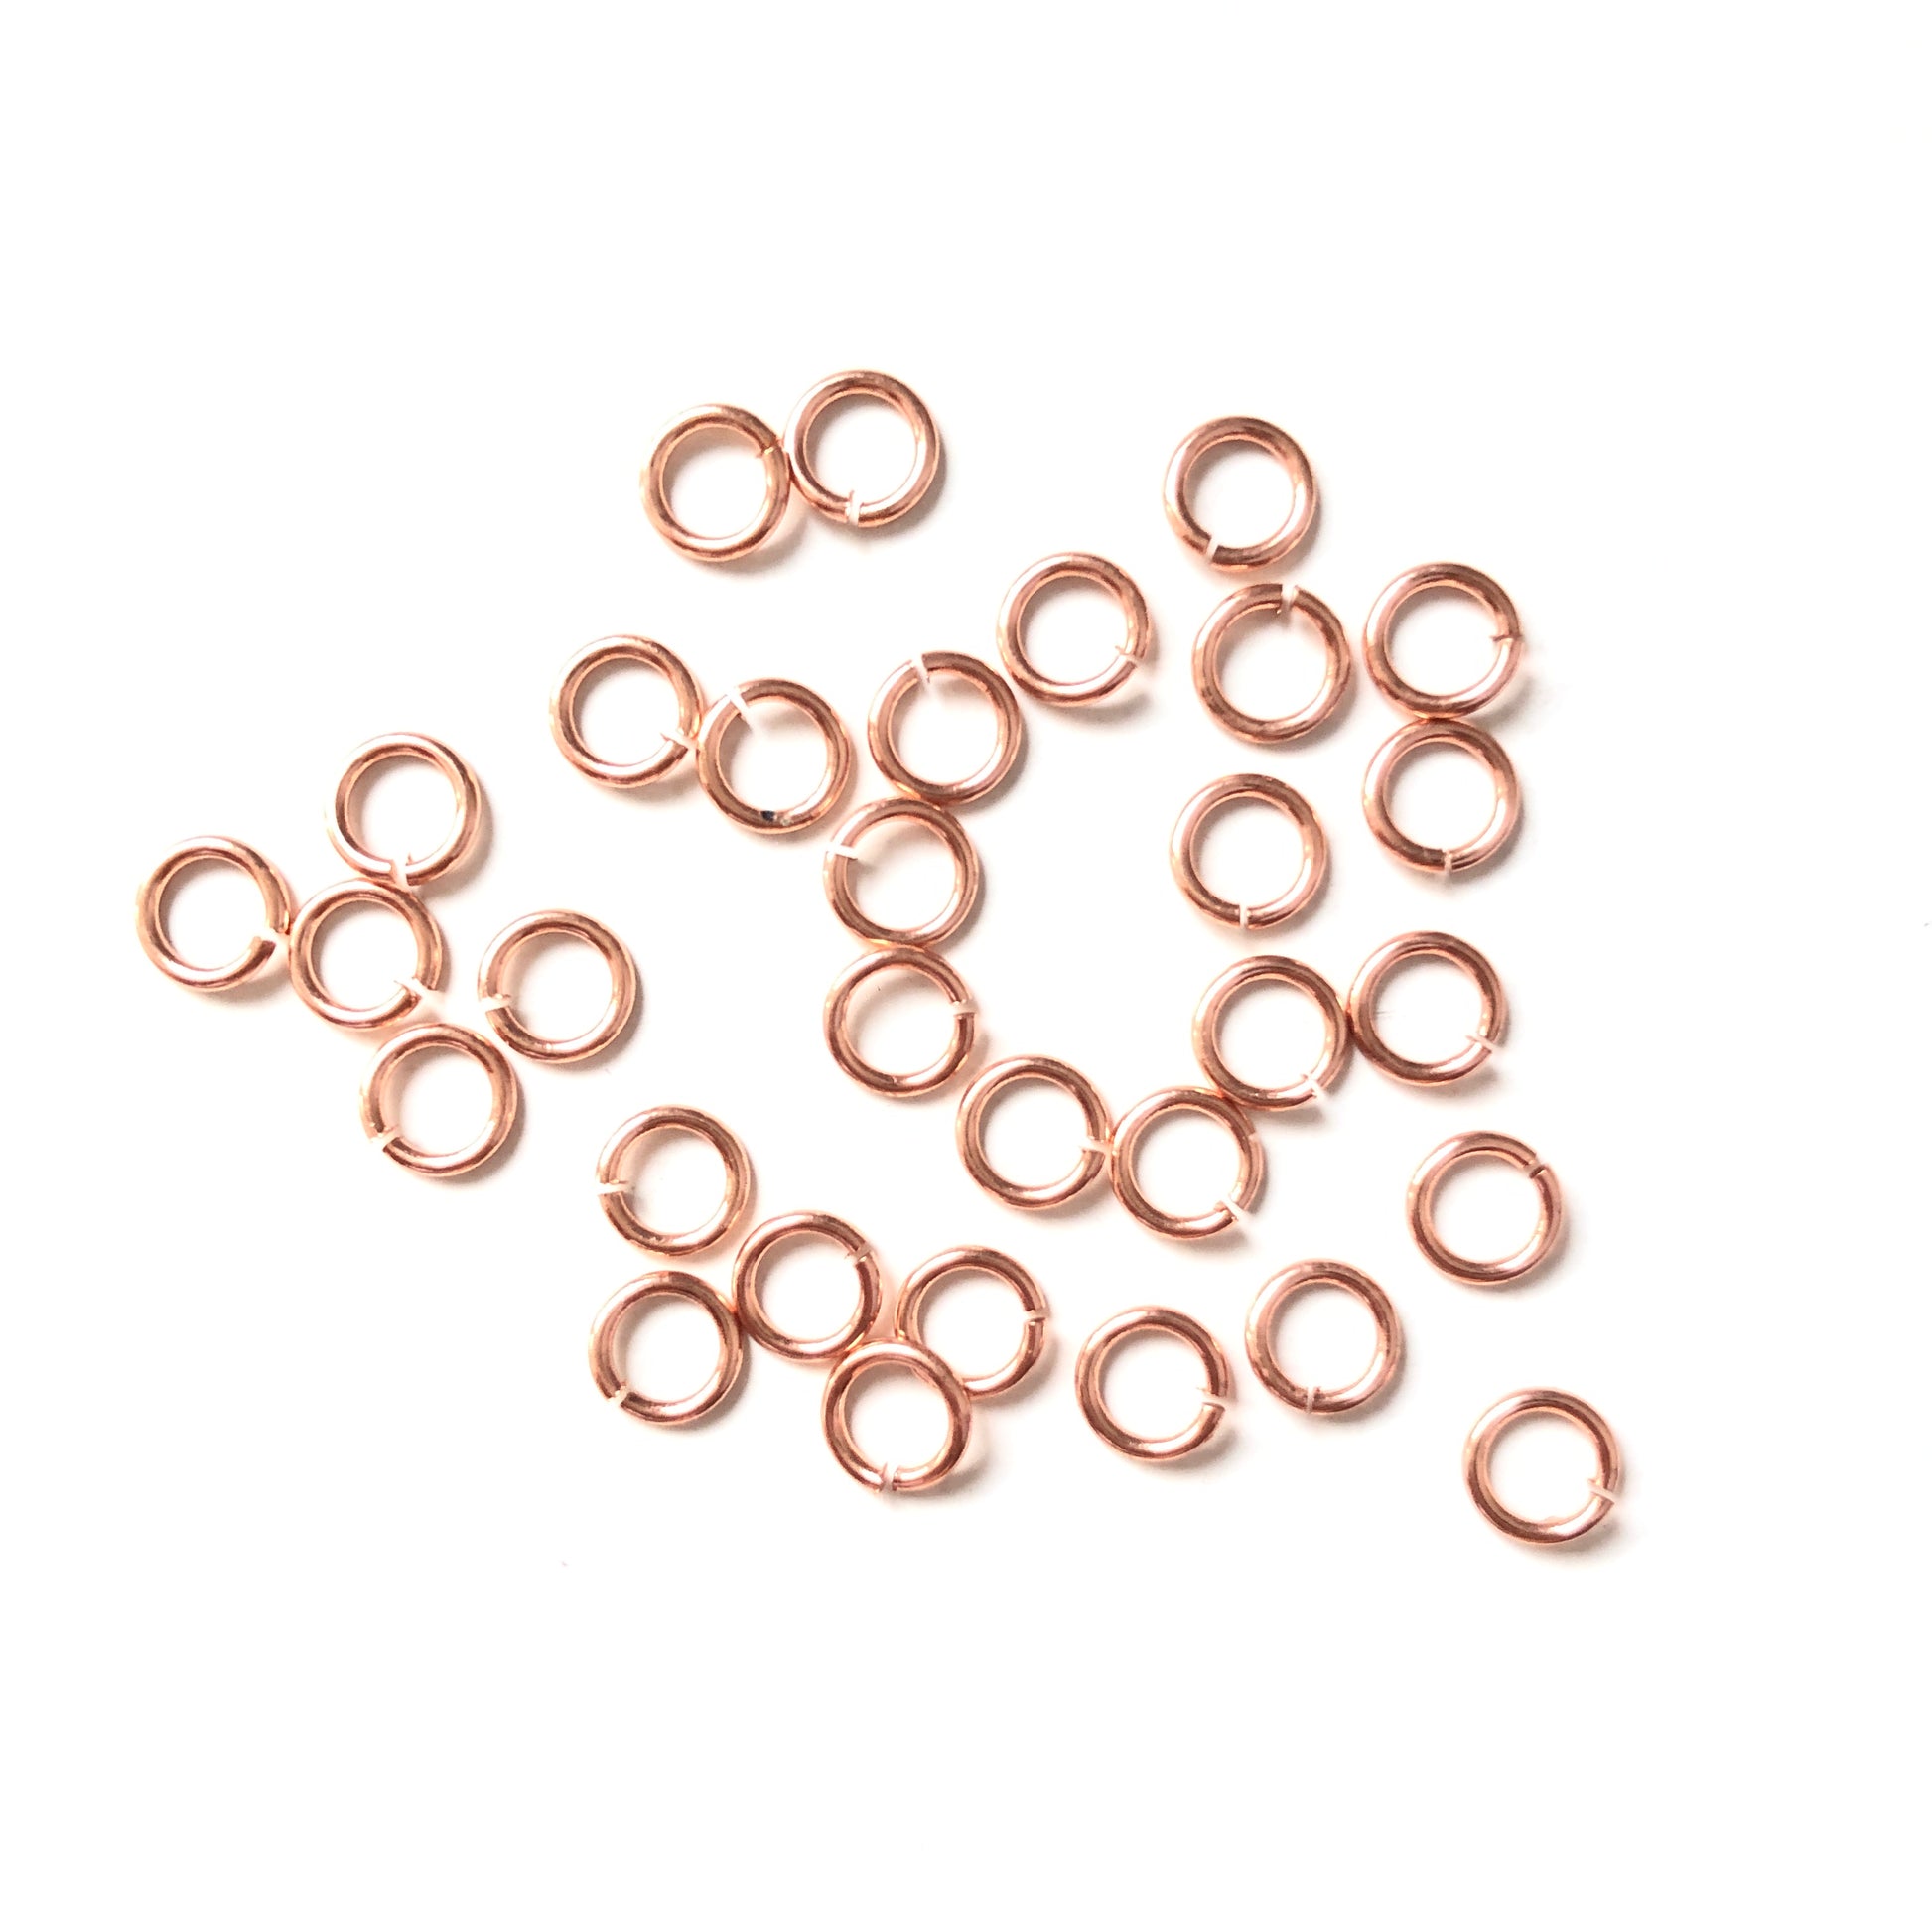 200pcs/lot 5/6/8mm Gold Plated Jump Ring-Rose Gold Accessories Charms Beads Beyond